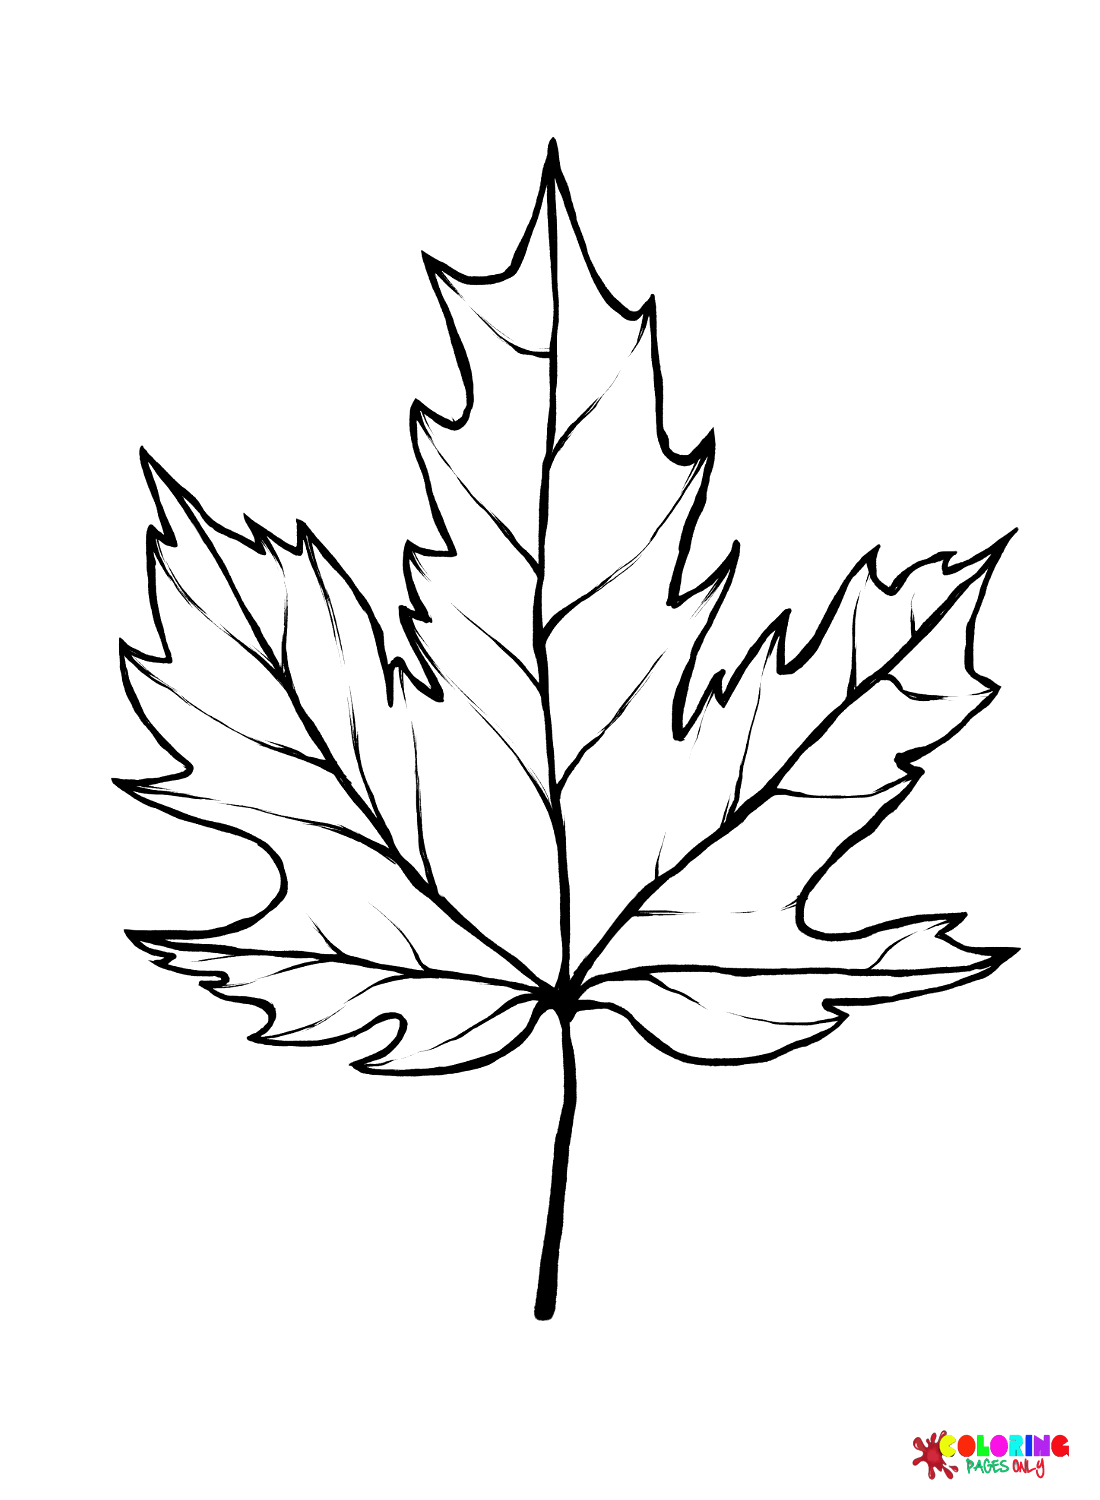 Sugar Maple Leaf from Leaves